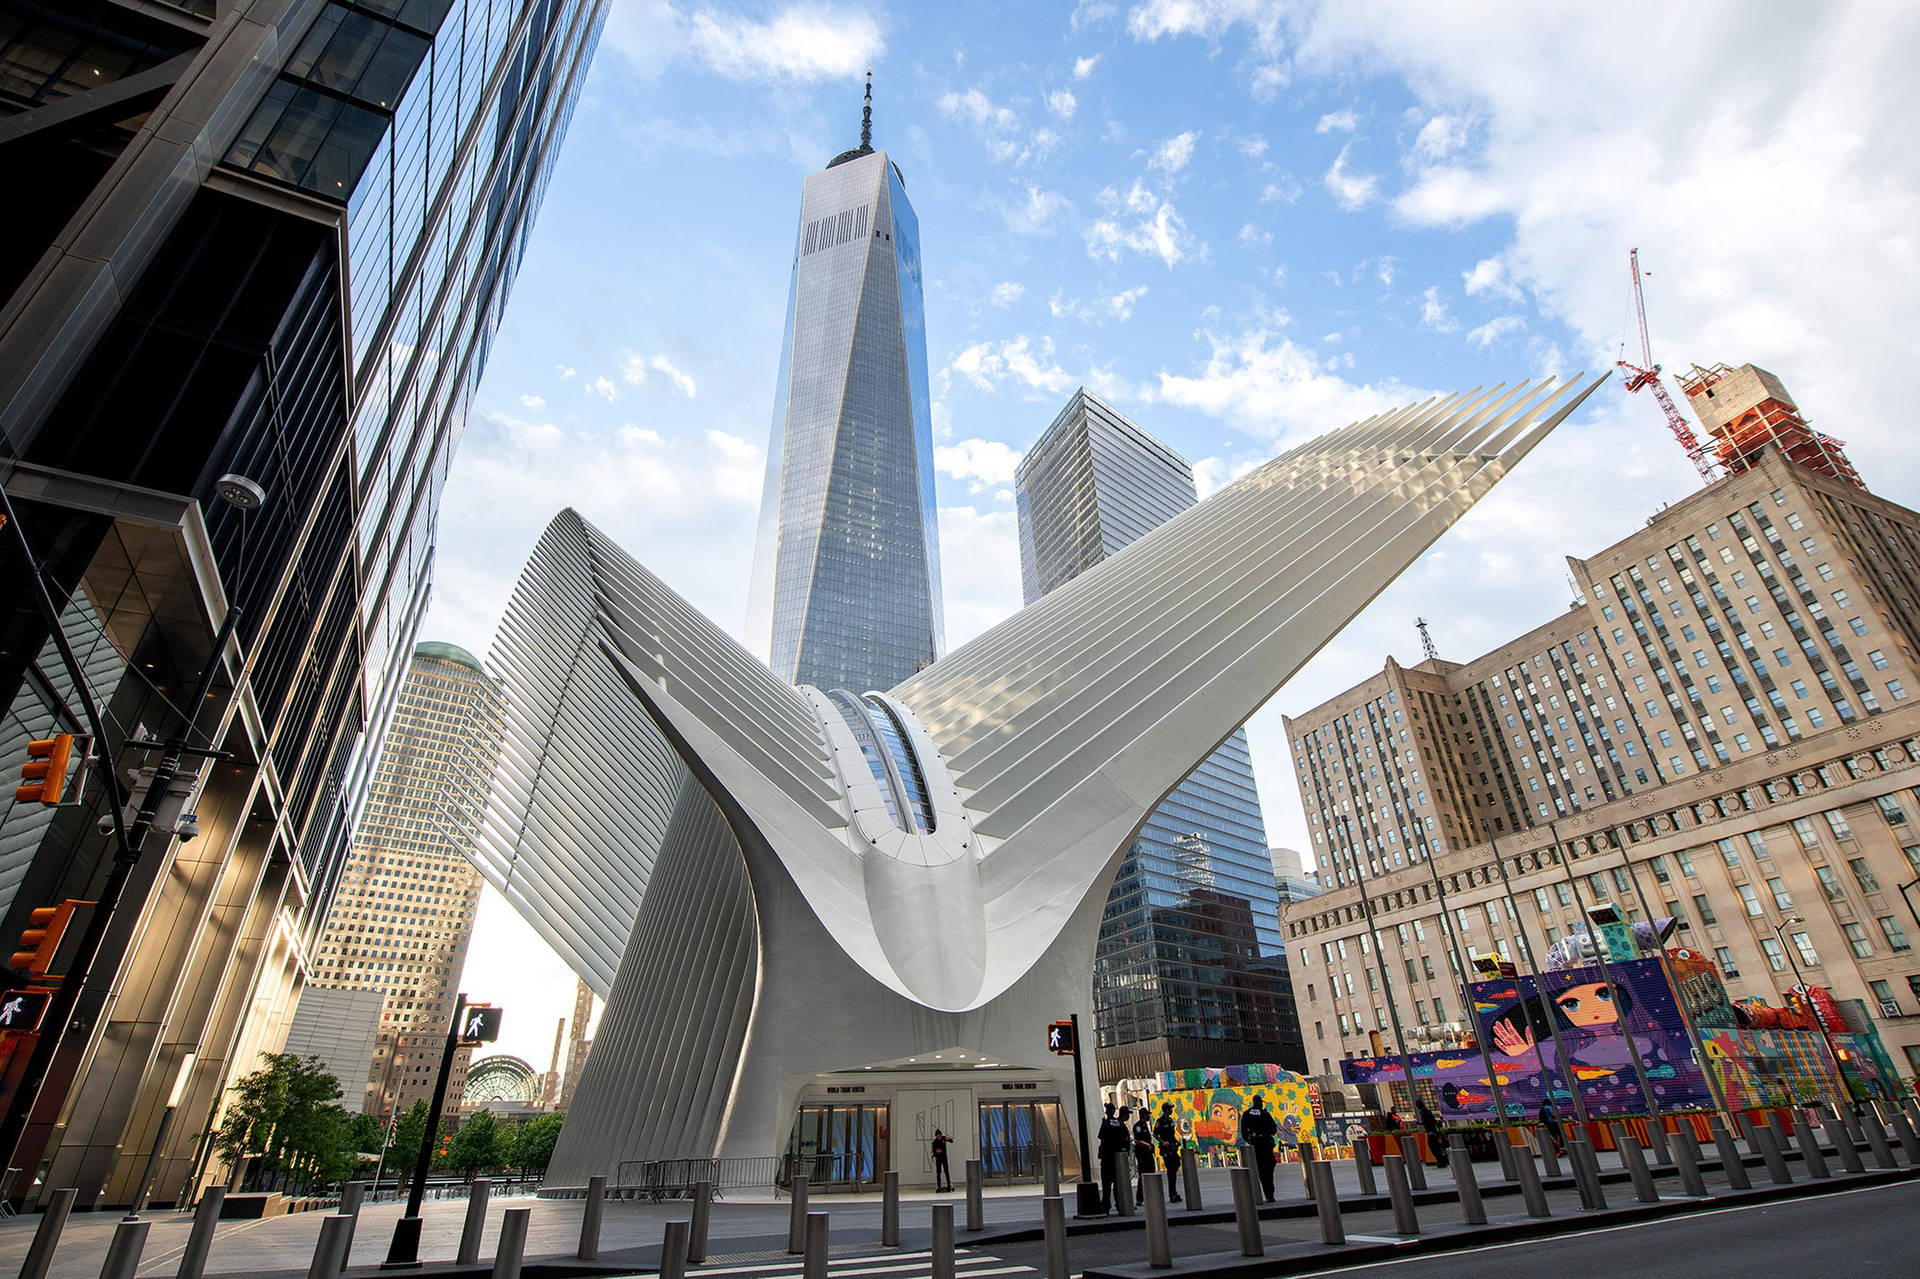 Striking Architecture of the World Trade Center Oculus Wallpaper